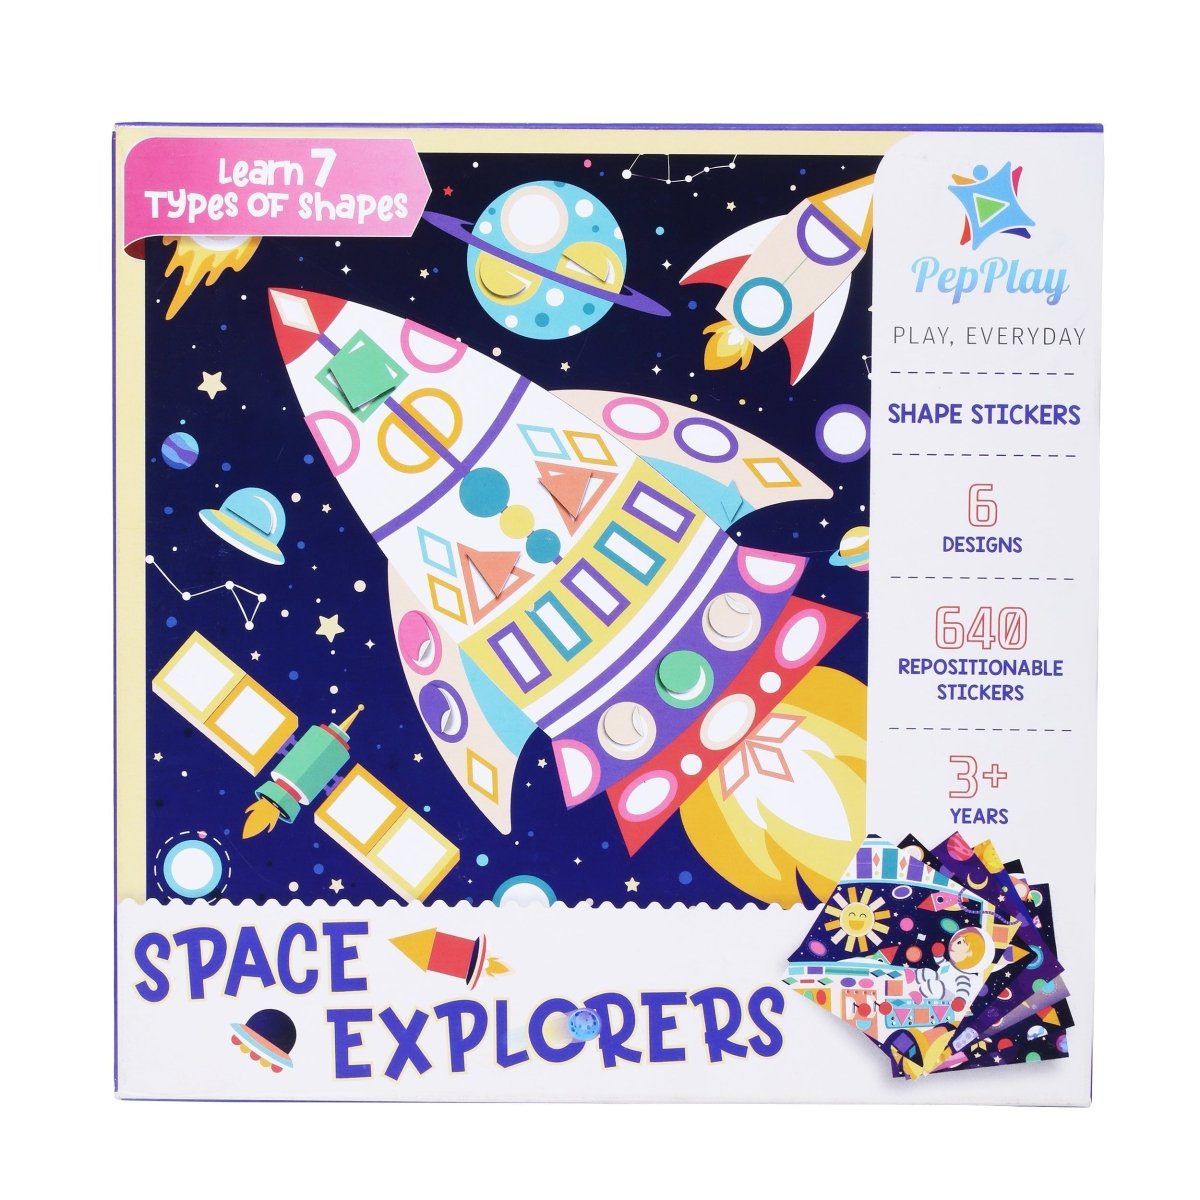 PepPlay Educational Shape Sticker- Space Explorers (7 Types of Shapes Learning Set ) - PP20603